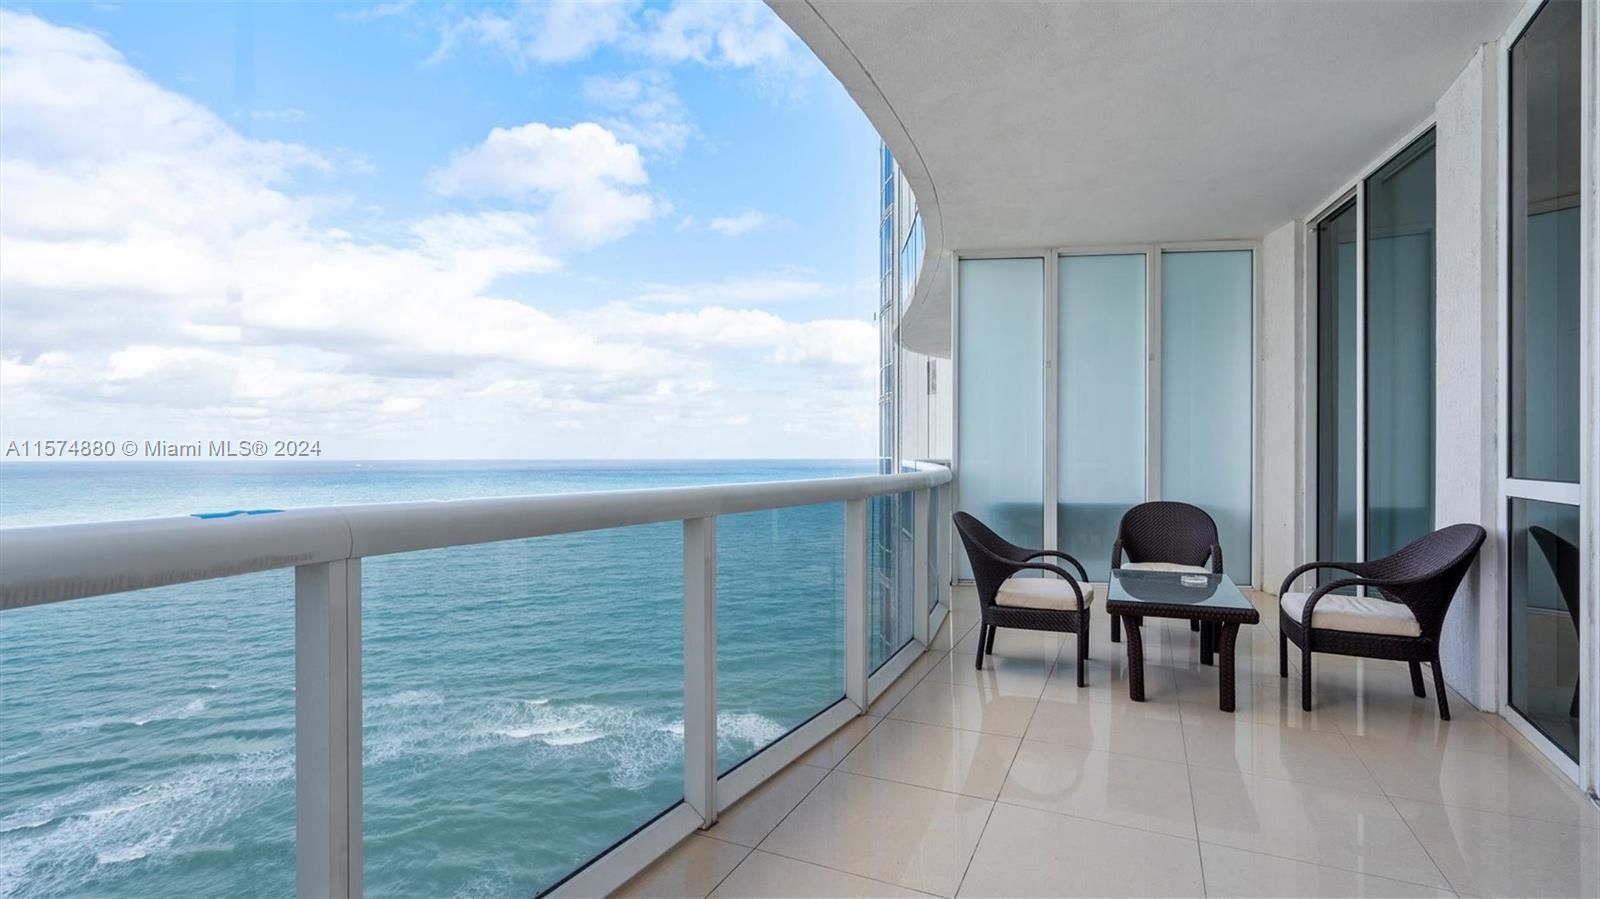 Enjoy stunning ocean views from this meticulously designed 3-bedroom, 3-bathroom beachfront property